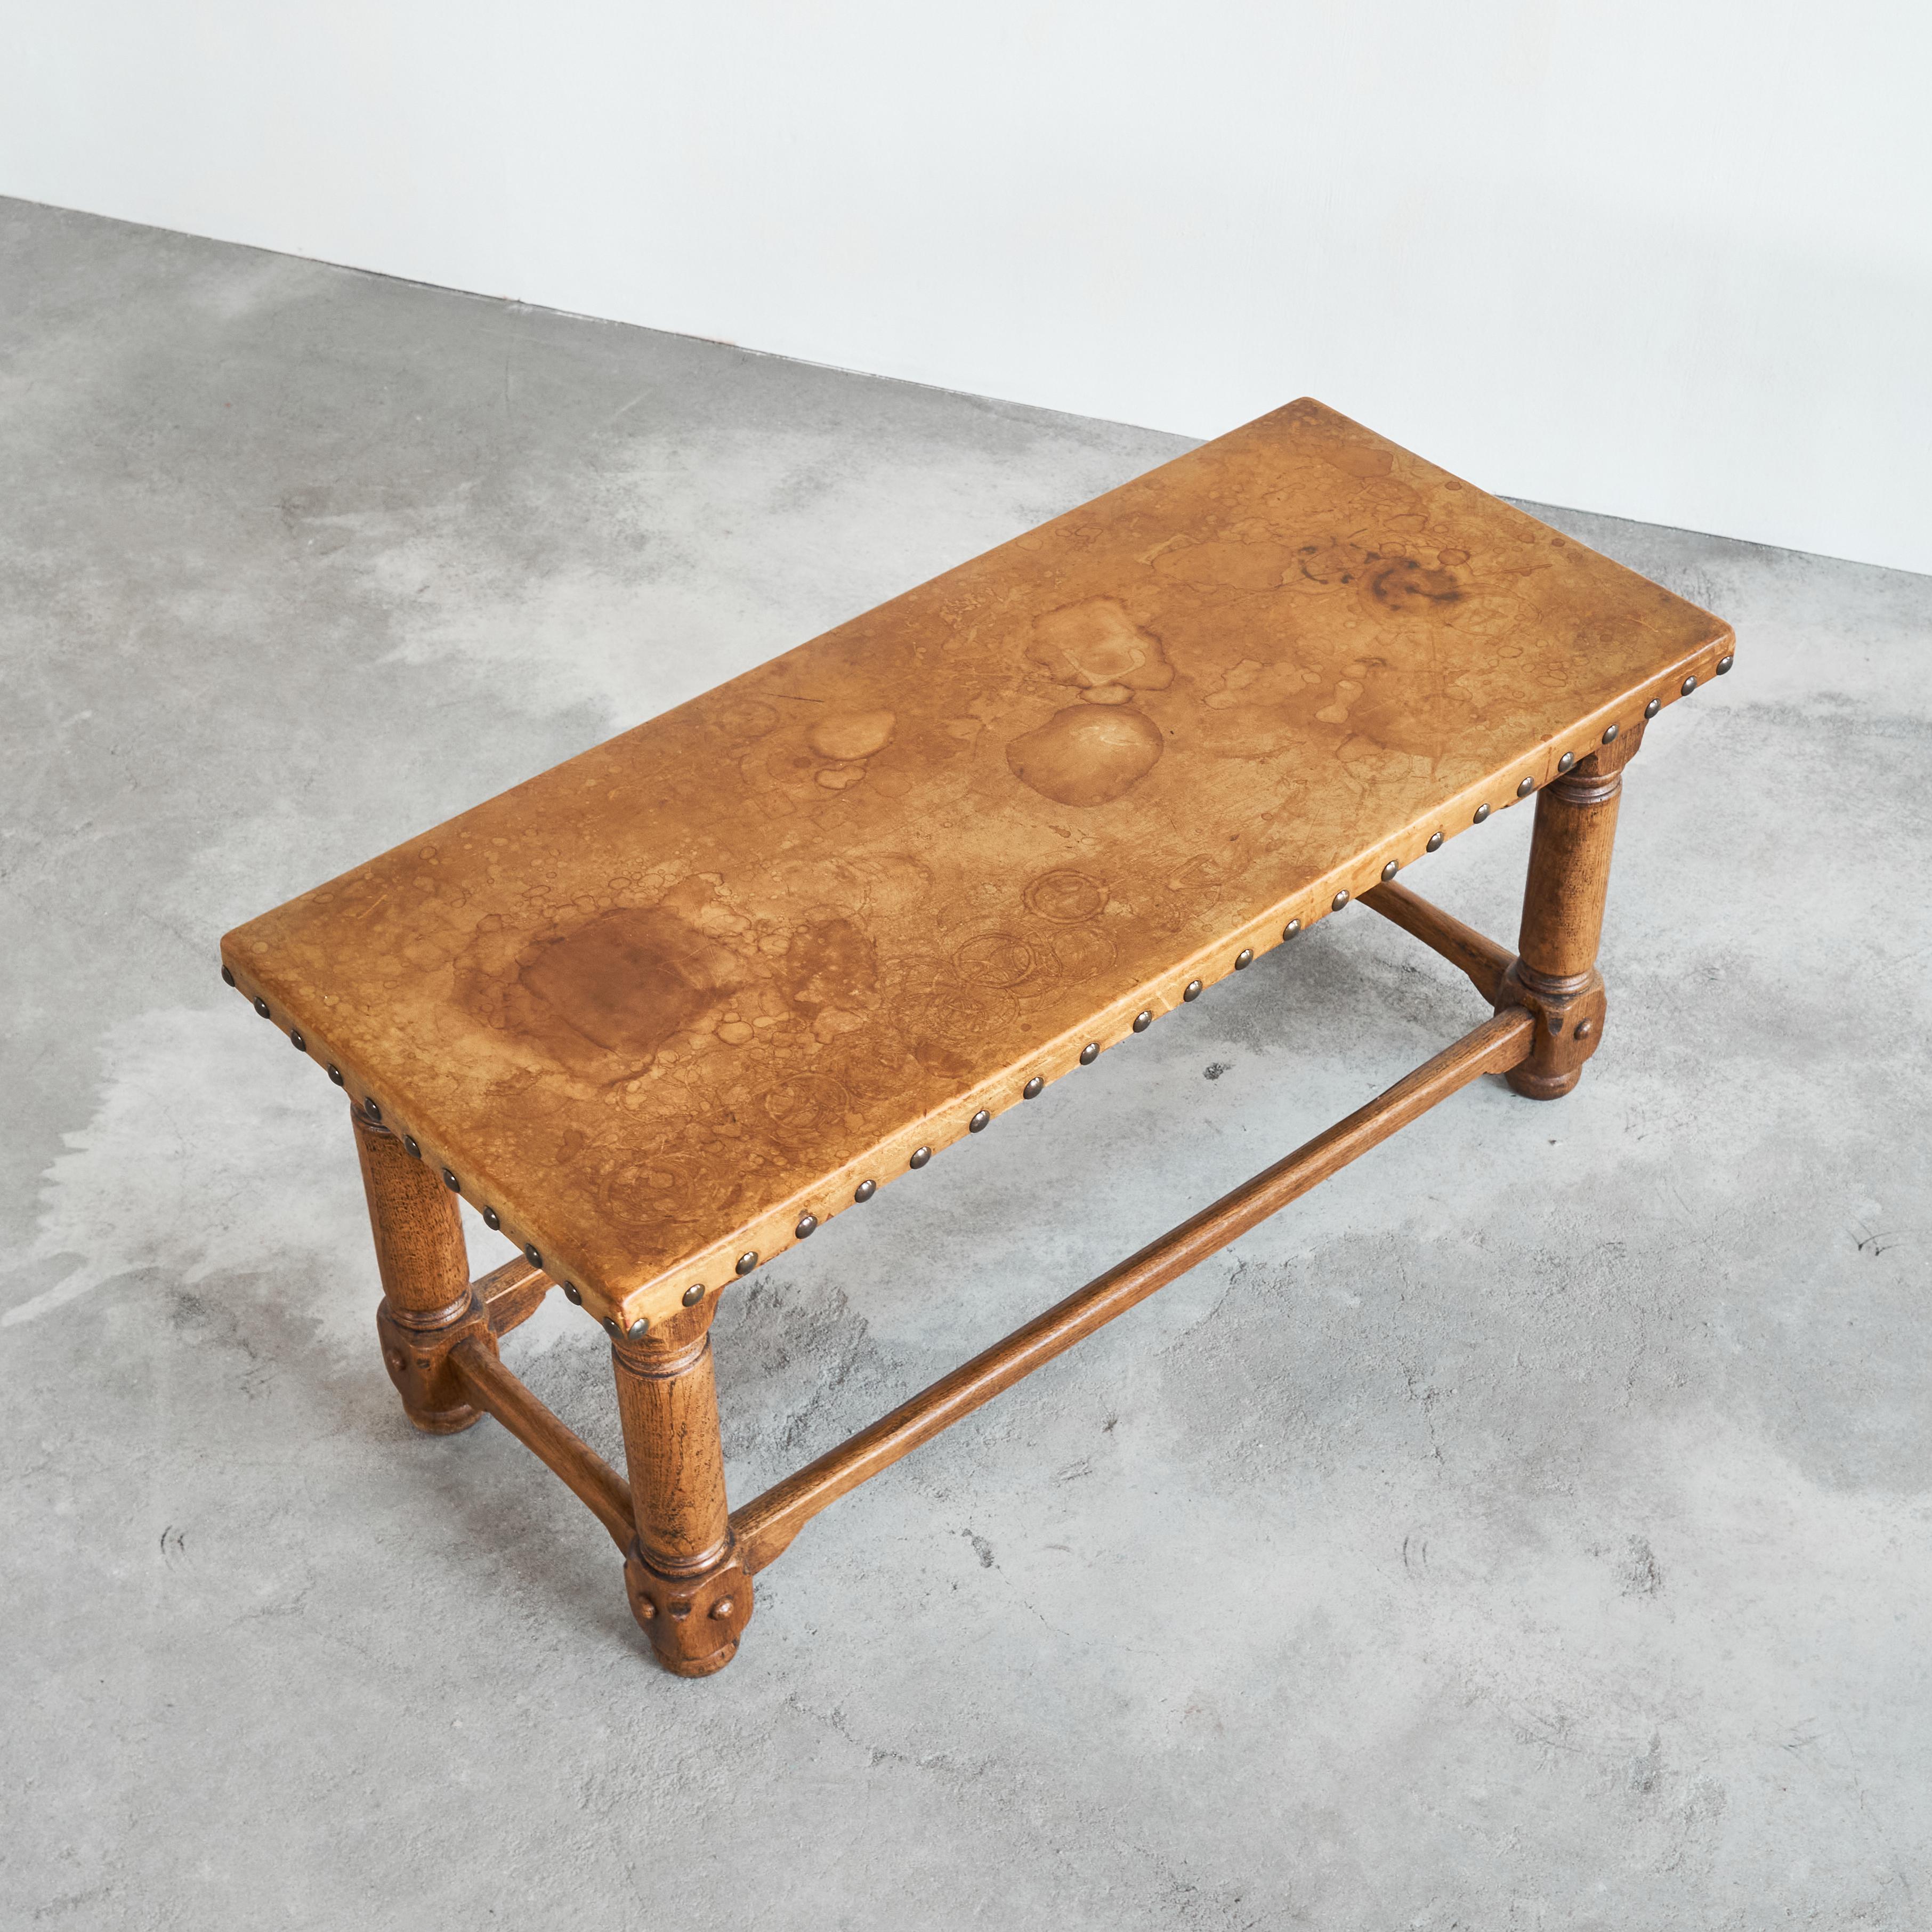 Spanish Brutalist Coffee Table in Solid Oak, Metal and Patinated Leather 1940s For Sale 11